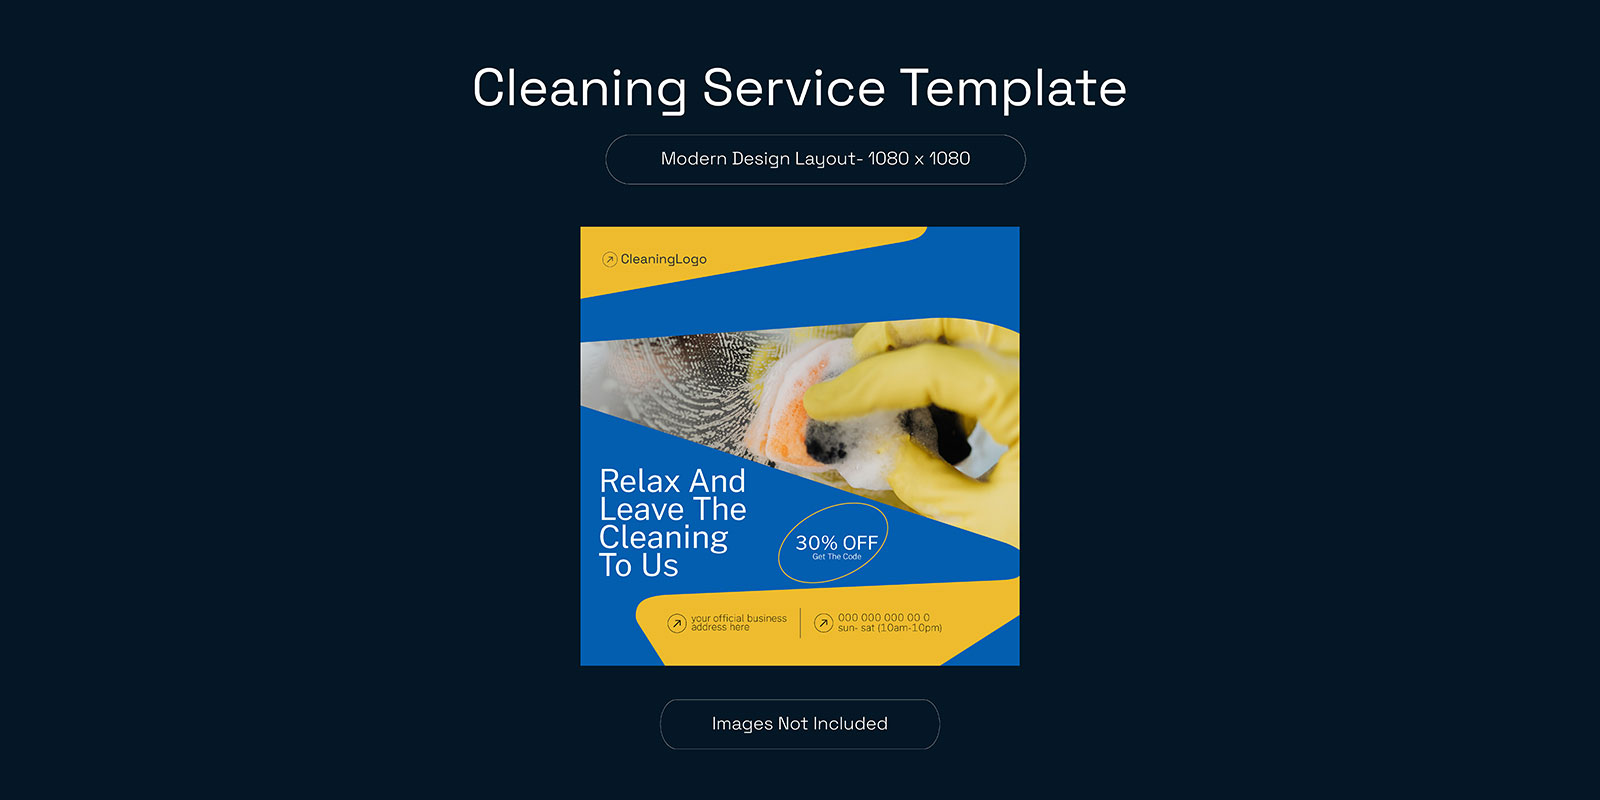 Cleaning Services Social Media Template For Your Business to Advertise and Promote